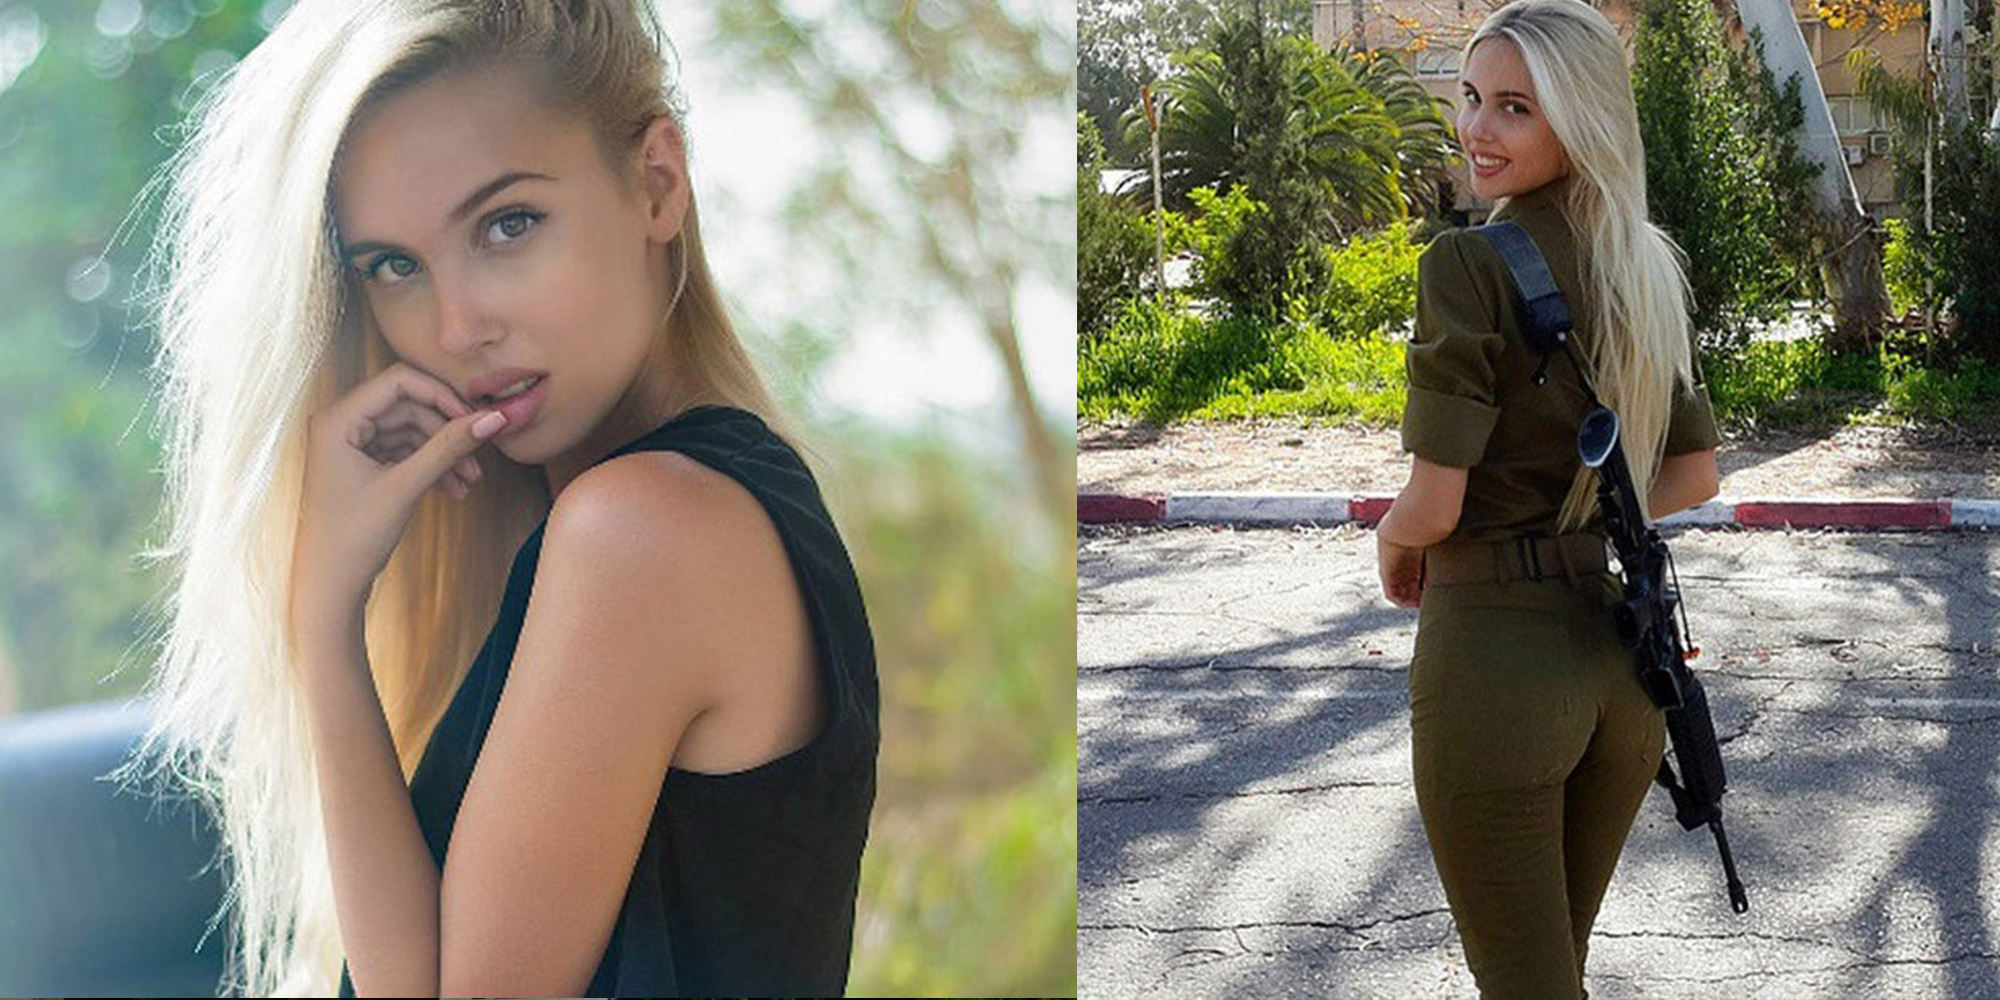 Maria Domark – Israeli Soldier and Model